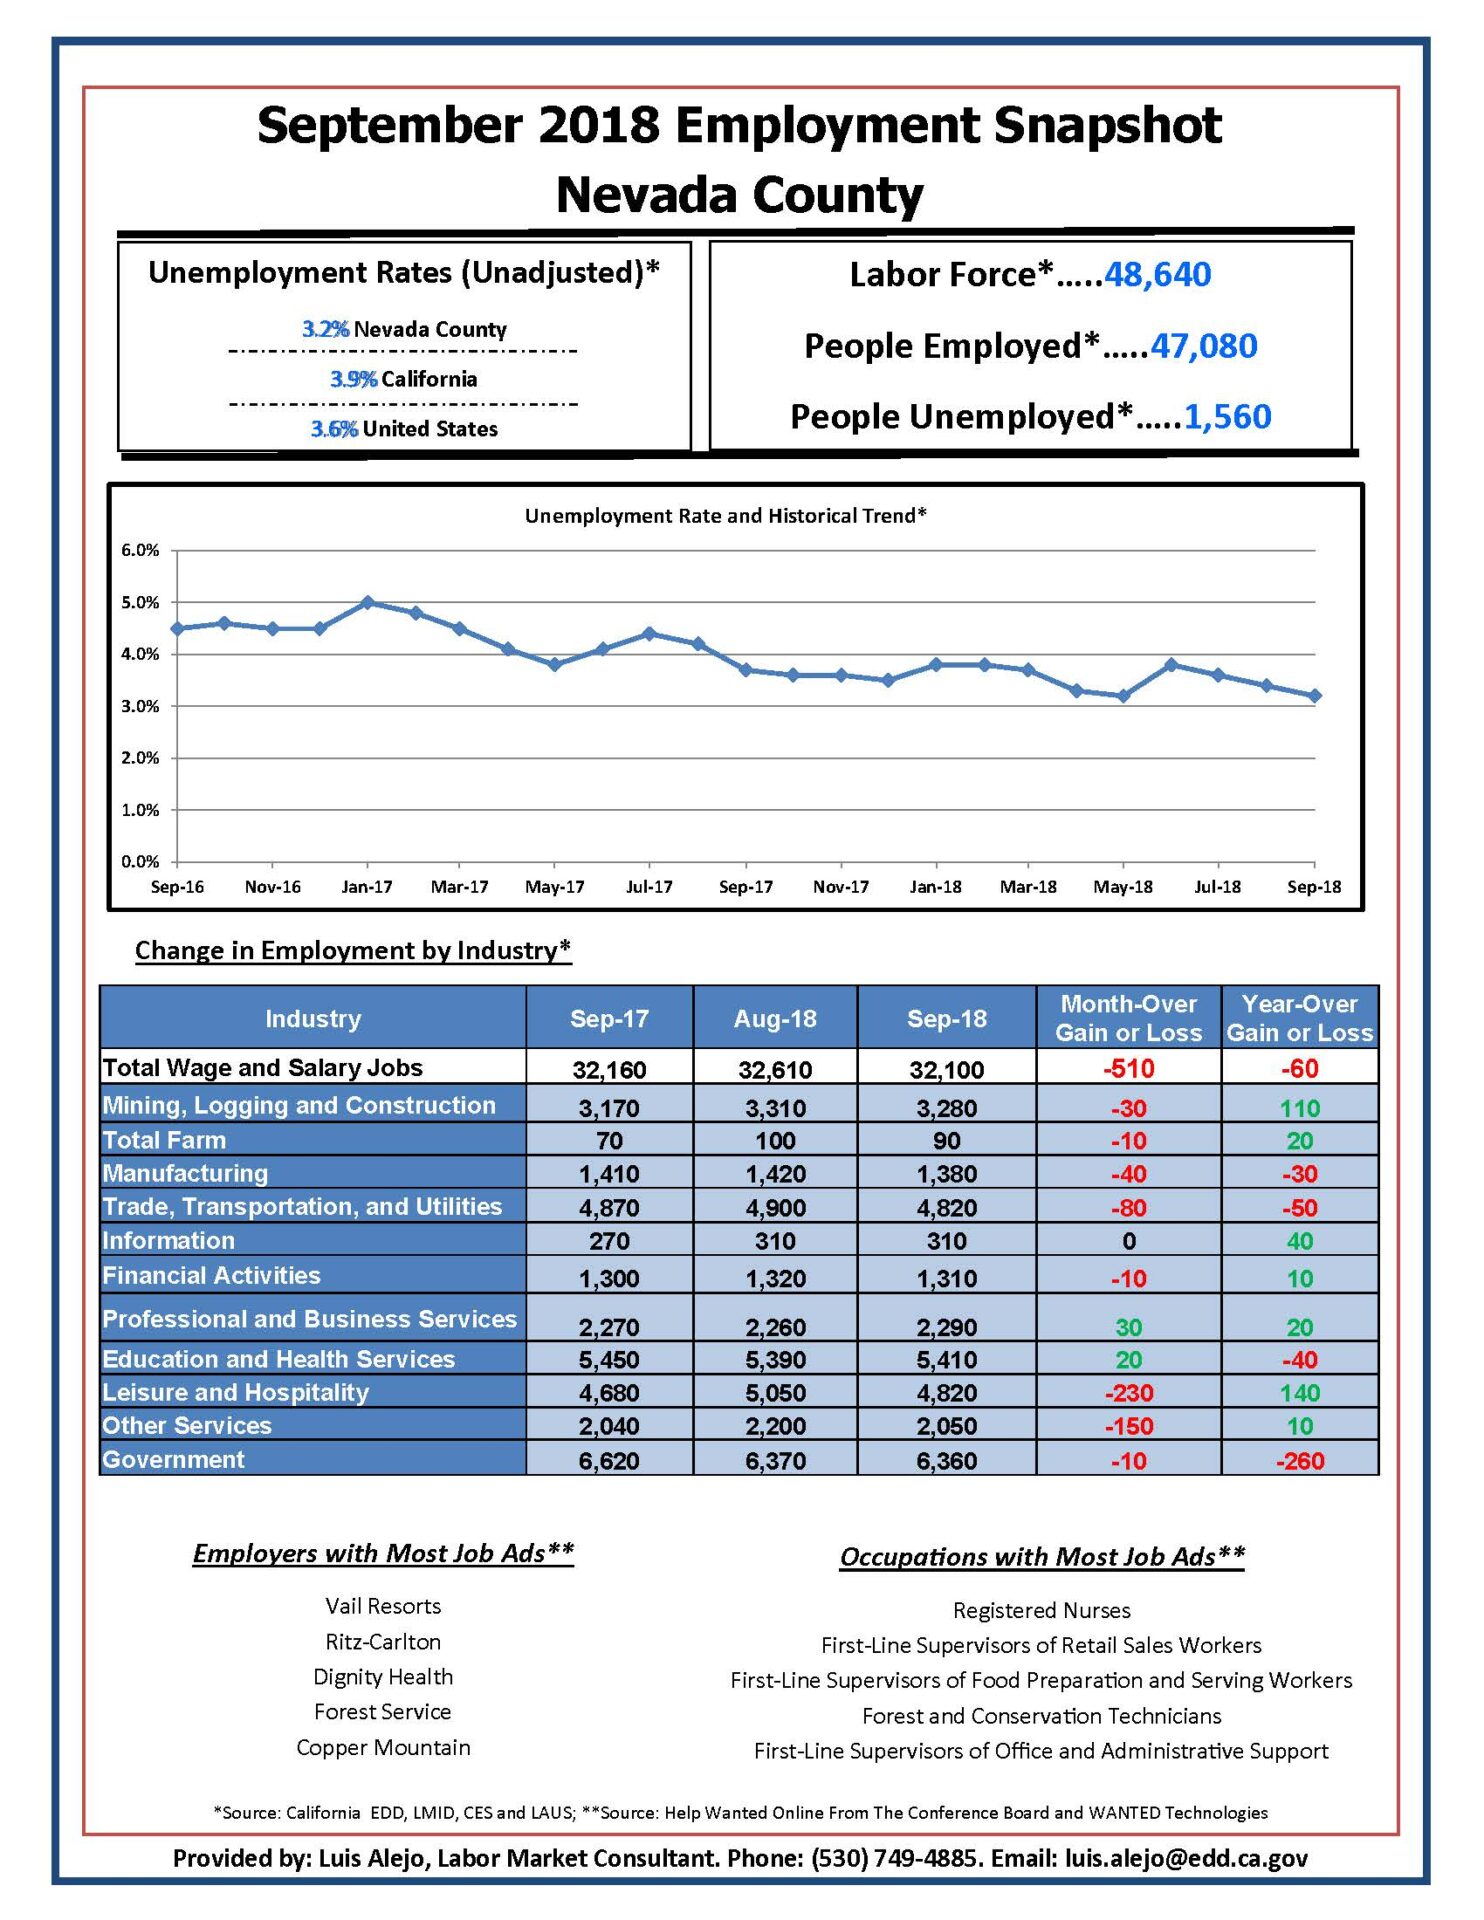 Nevada County Employment Snapshot September 2018 Numbers